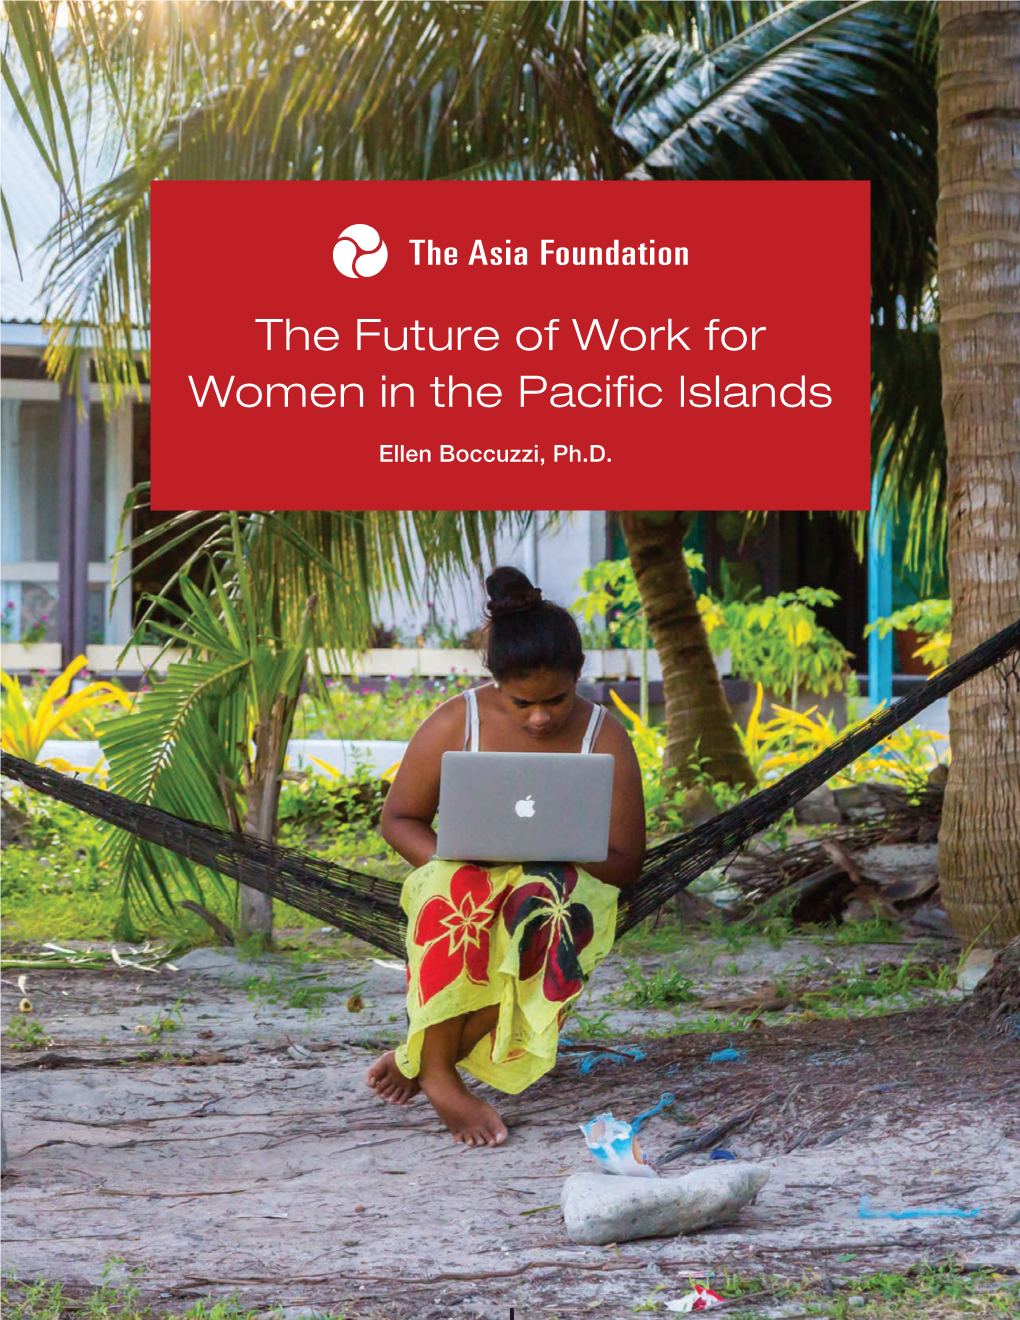 The Future of Work for Women in the Pacific Islands